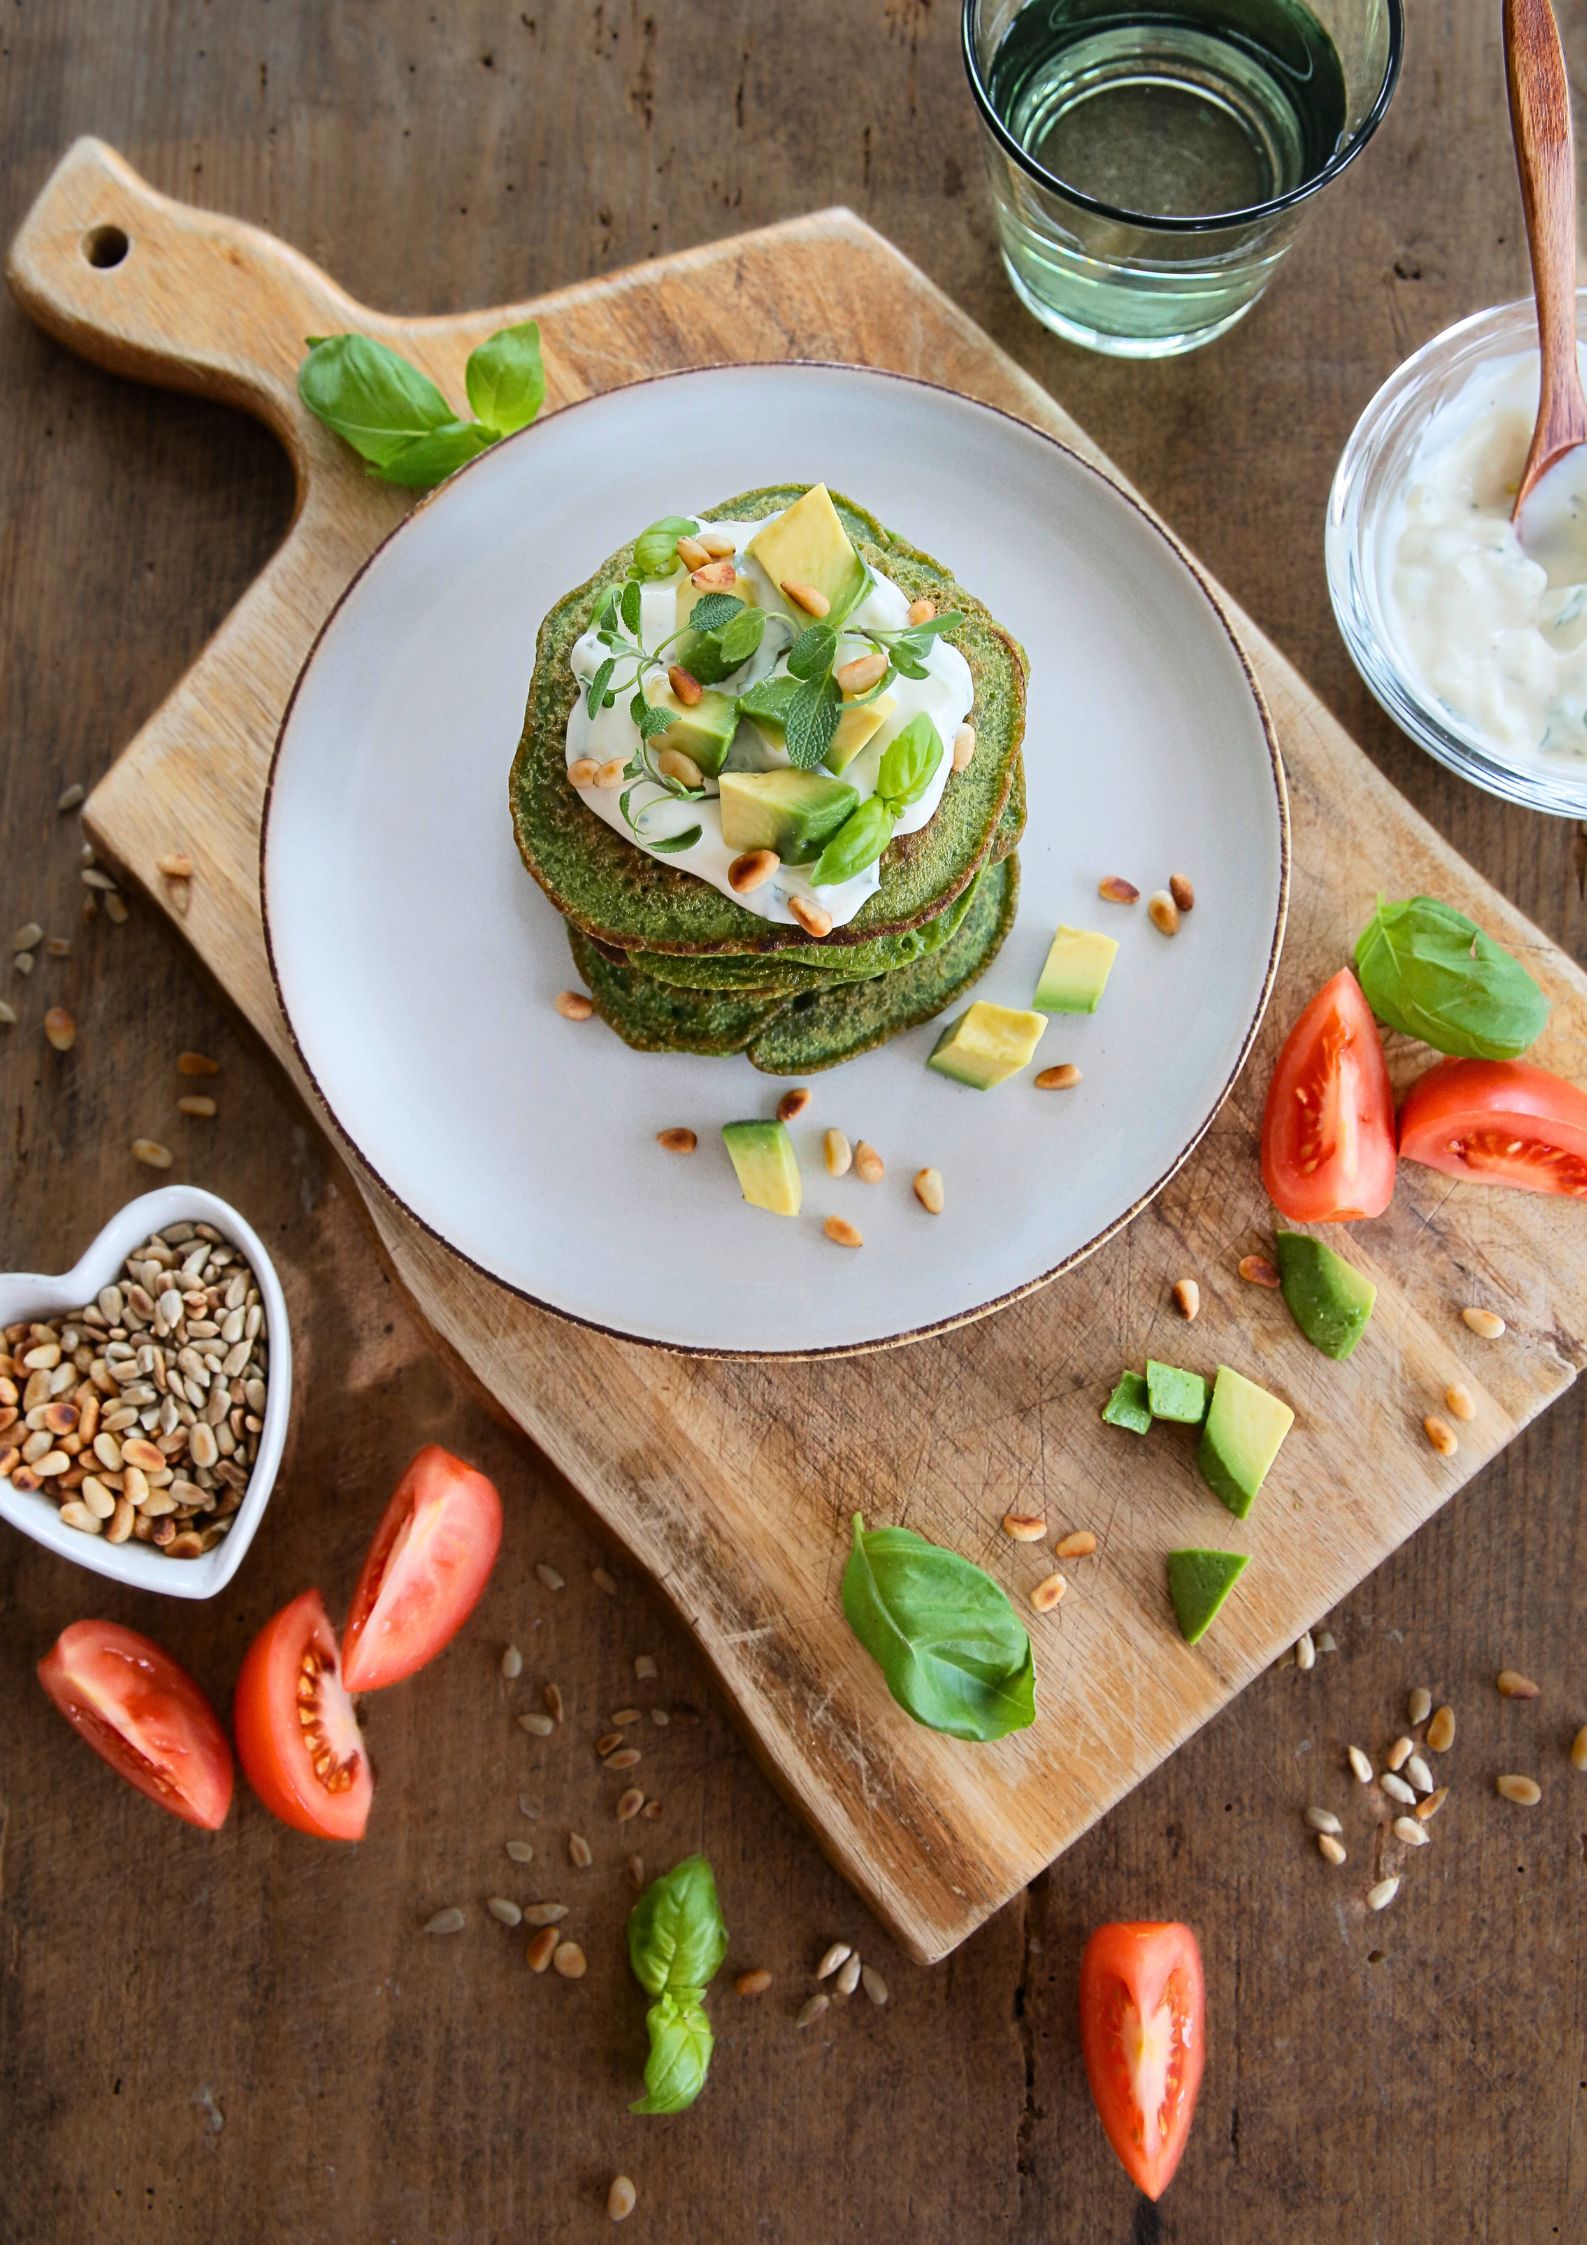 A delicious savoury breakfast or even lunch or dinner these spring onion pancakes are quick, healthy, loaded with flavour and gluten free! #pancakes #breakfast #glutenfree #vegan